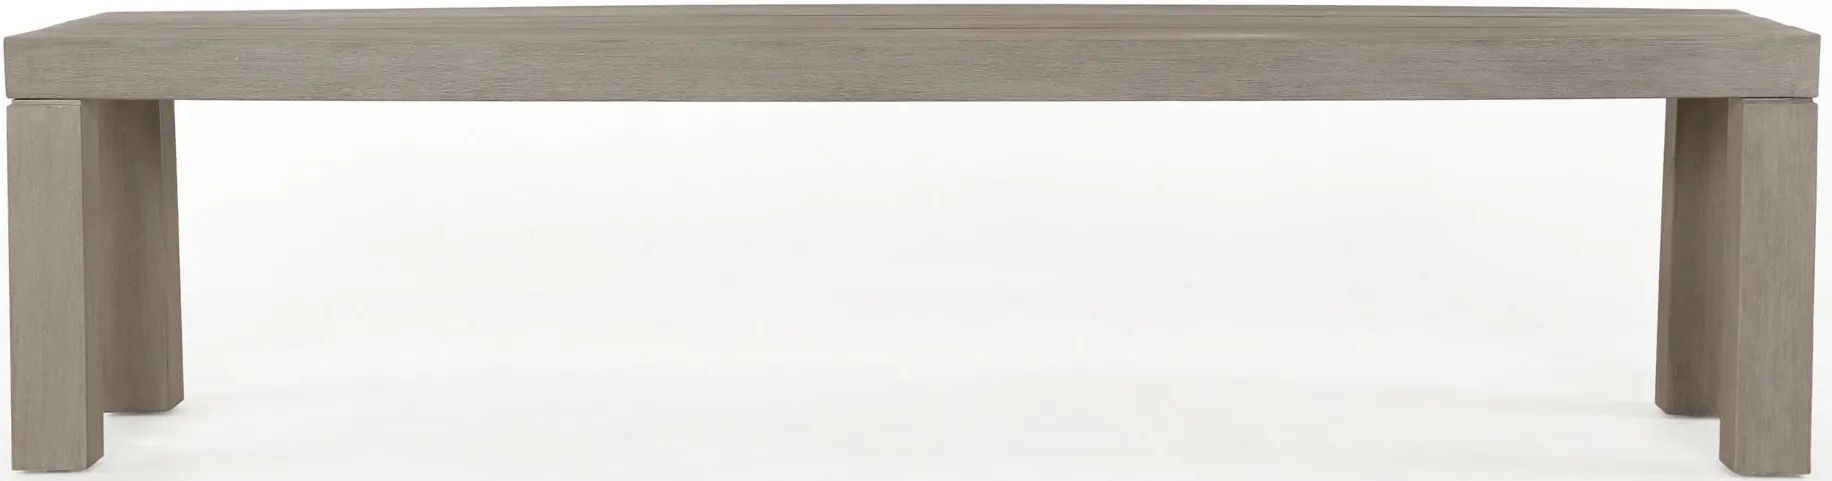 Sonora Outdoor Dining Bench in Weathered Gray by Four Hands